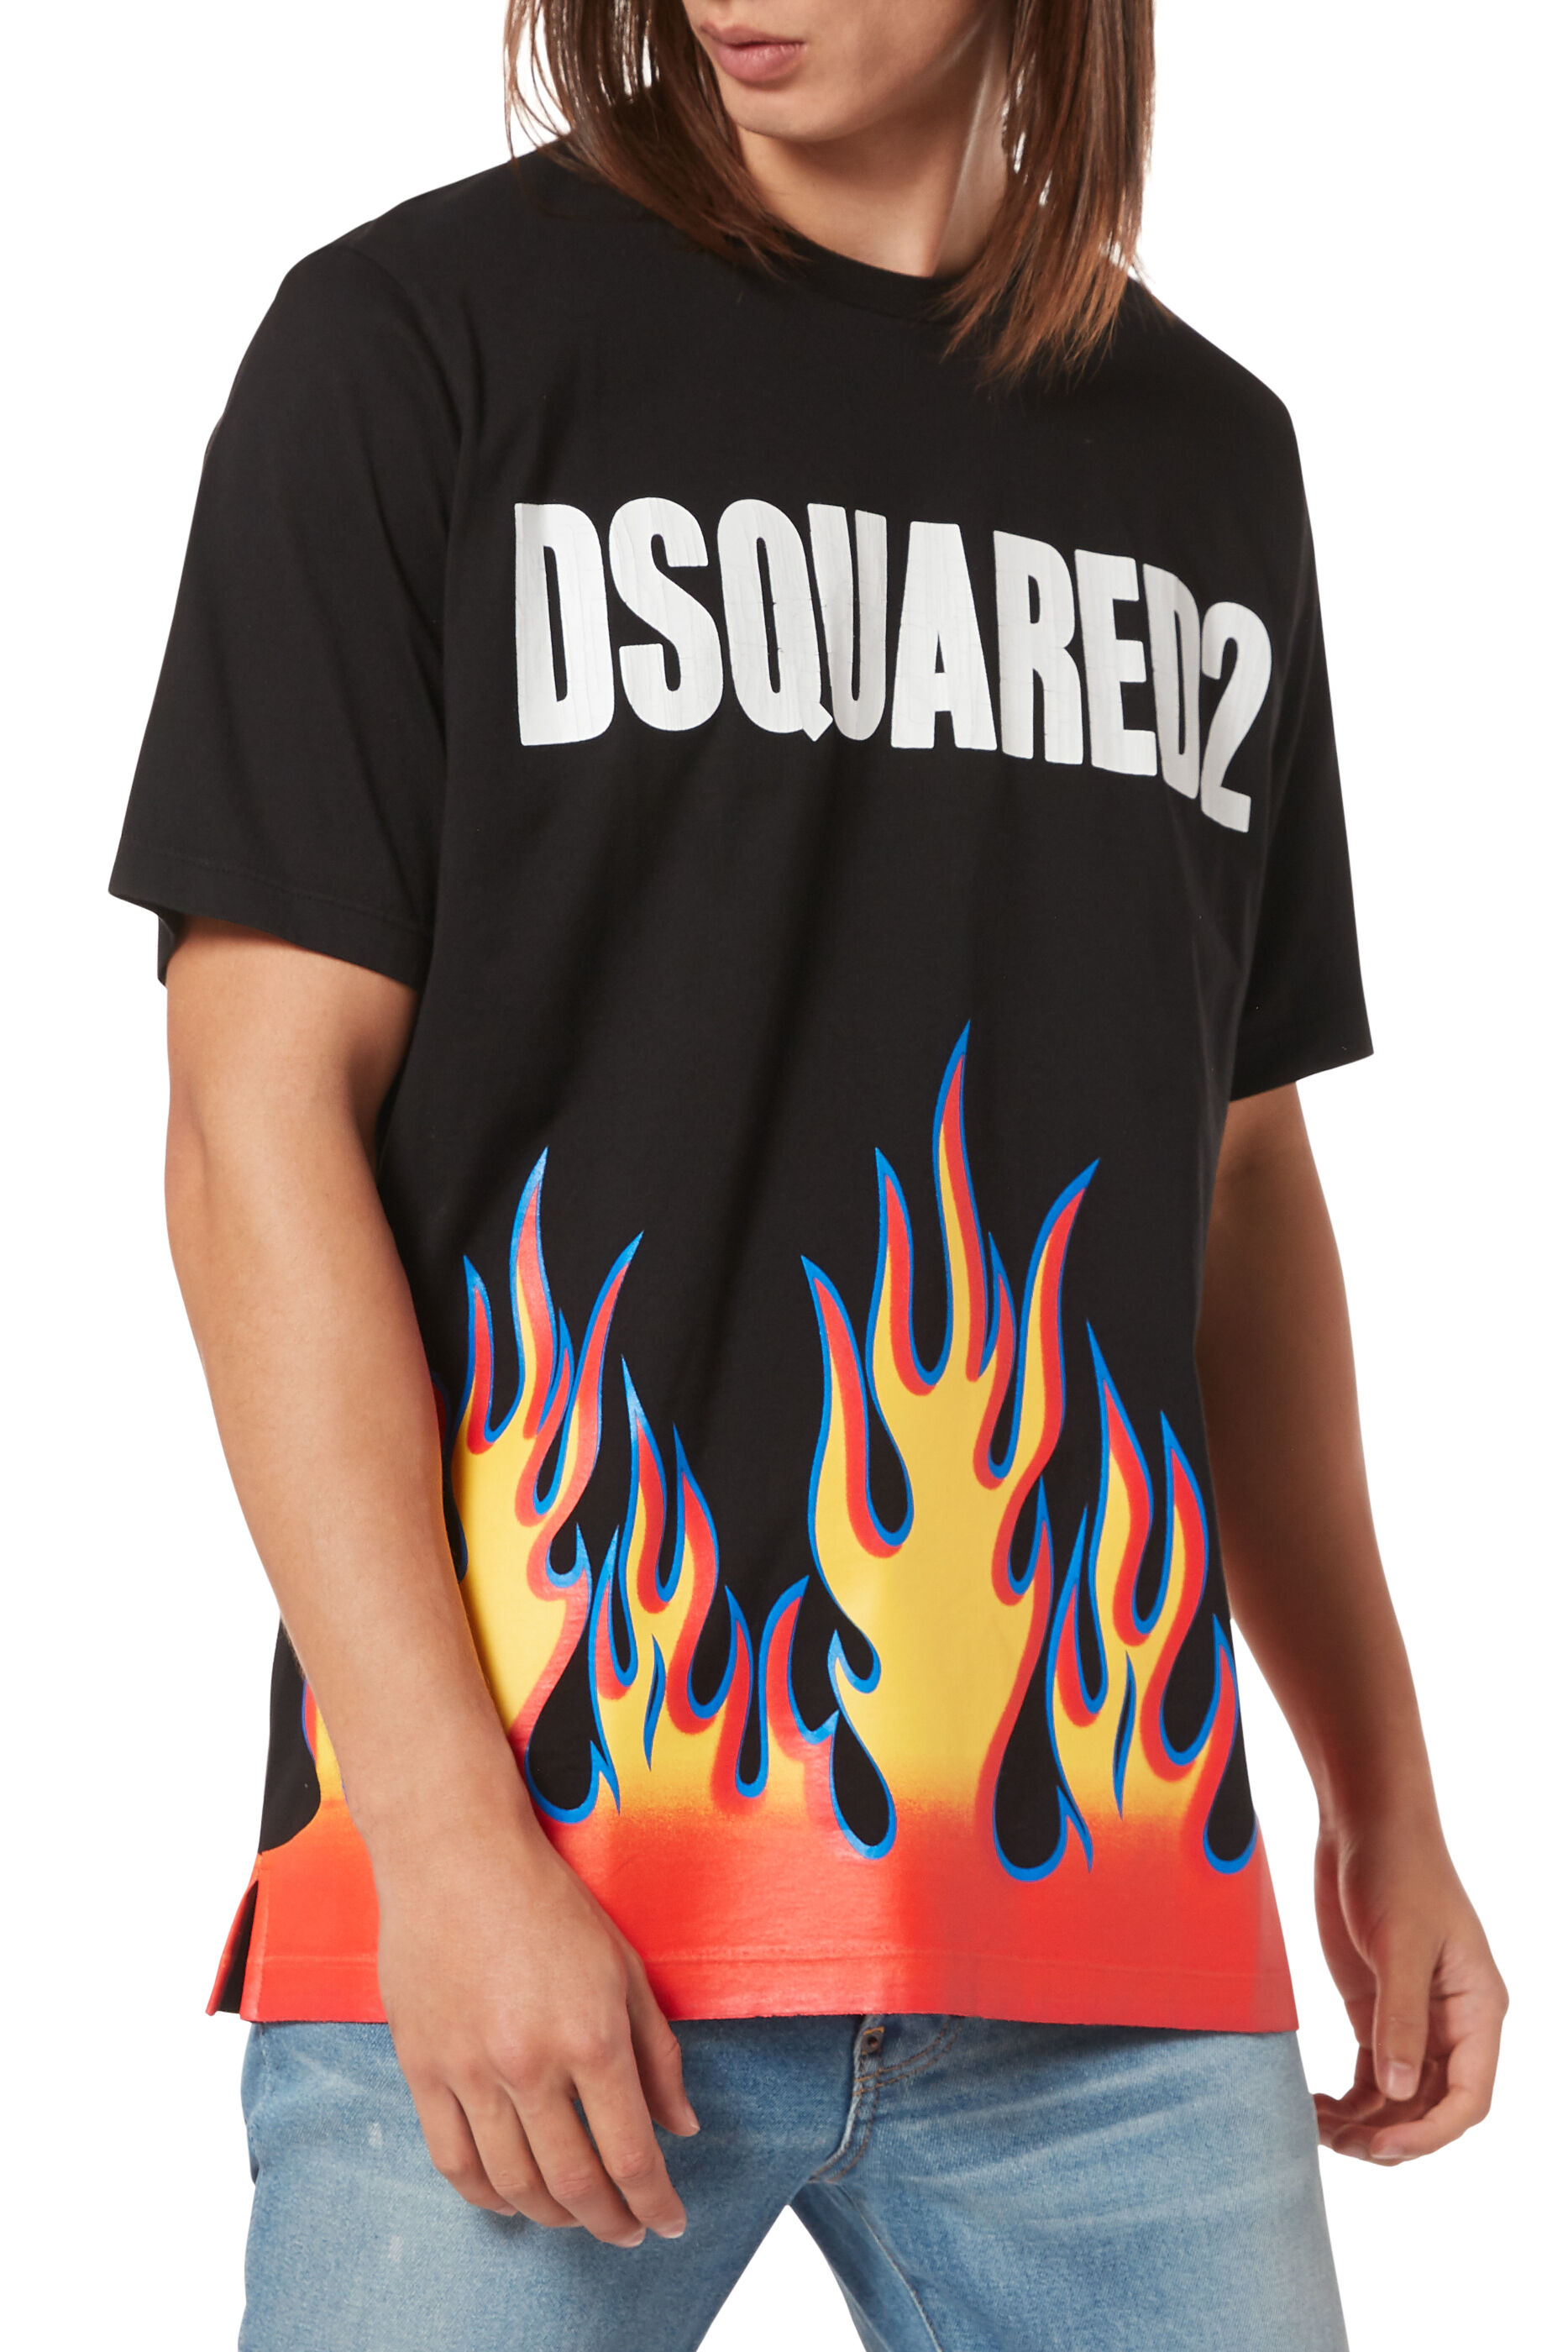 dsquared tops sale